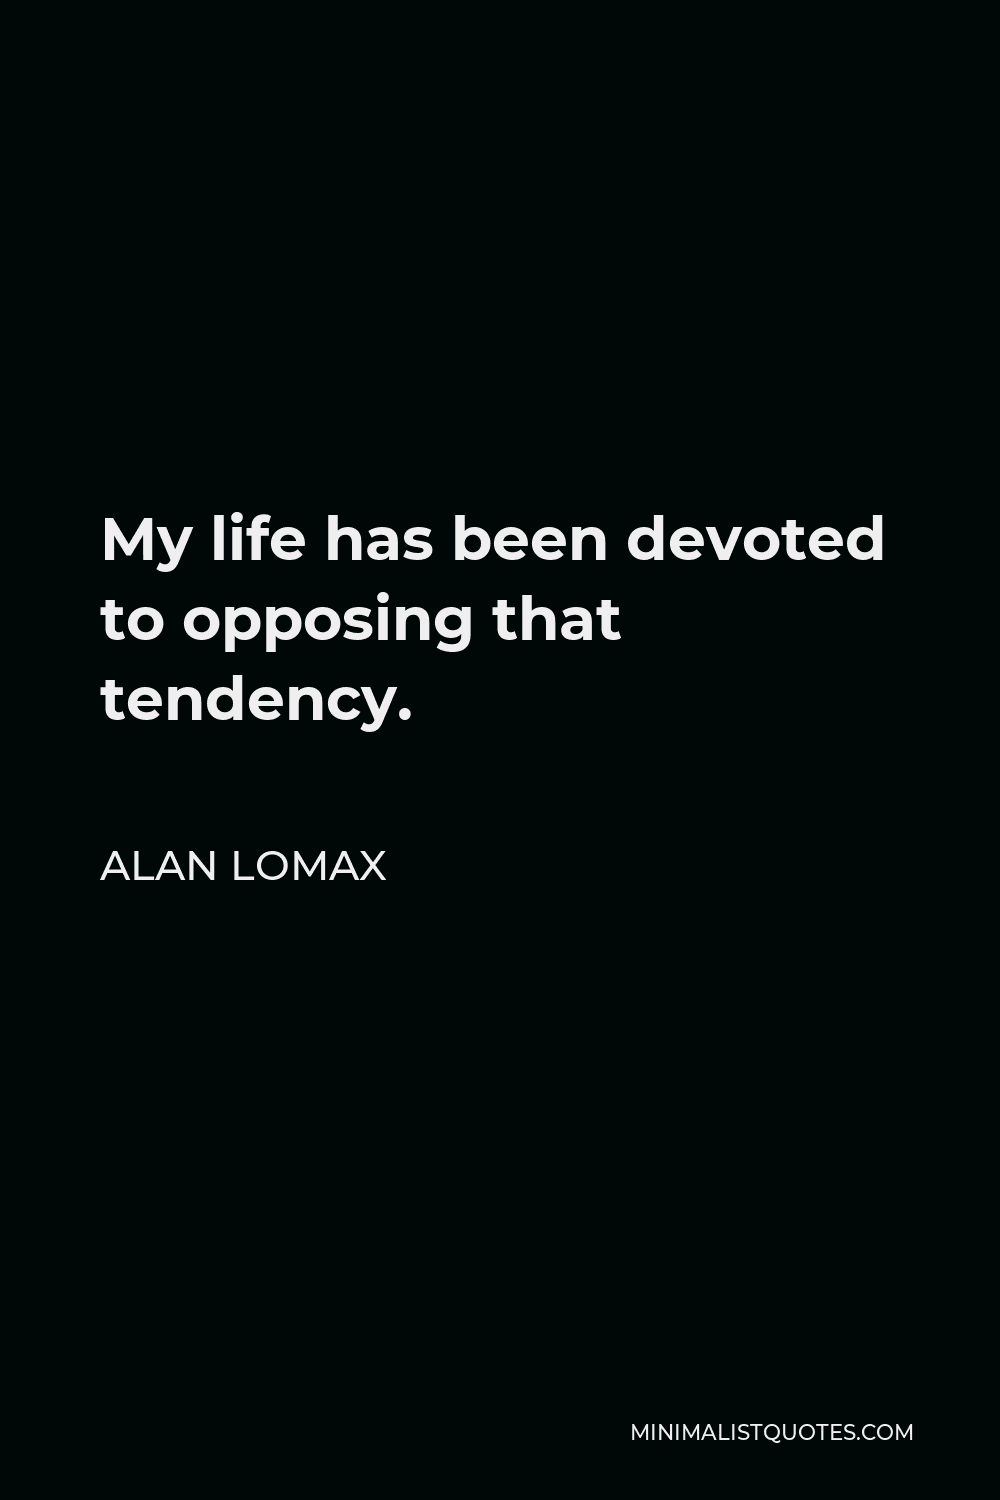 Alan Lomax Quote - My life has been devoted to opposing that tendency.